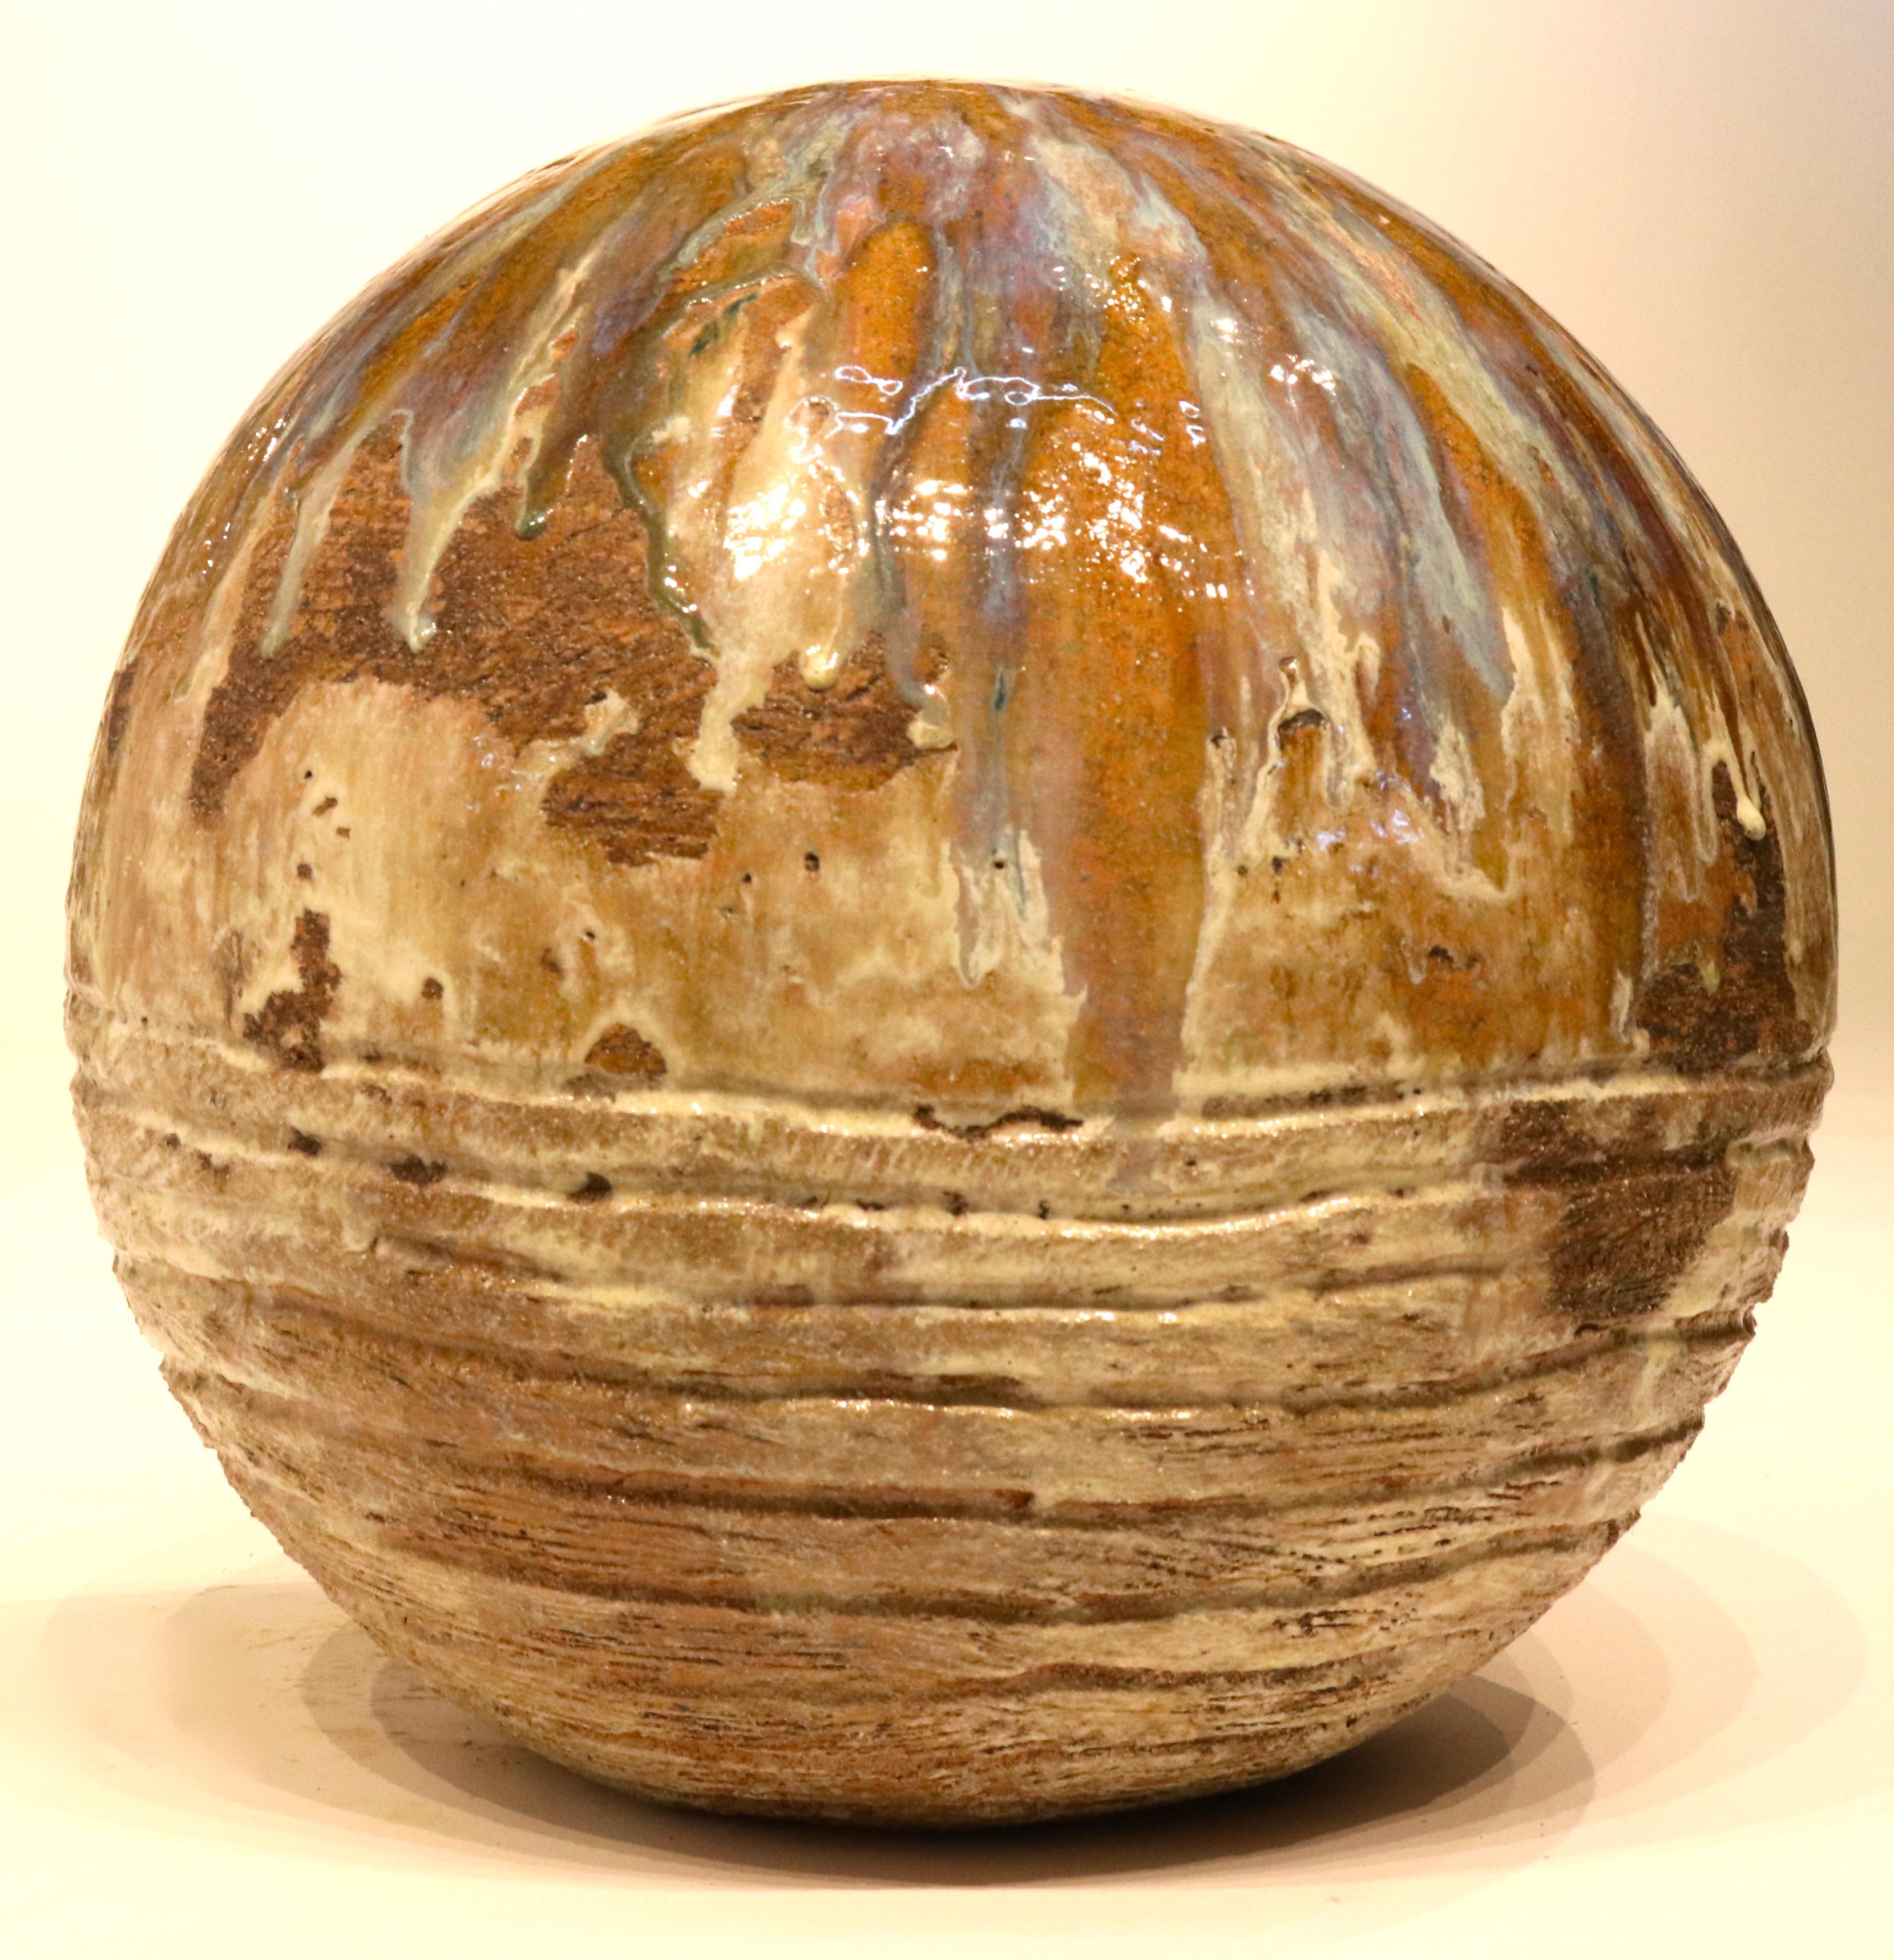 Large Ceramic Orb Sculpture - Modern Abstract Pottery Art - Ash and Color Glazes - Brown Abstract Sculpture by Mark Wade